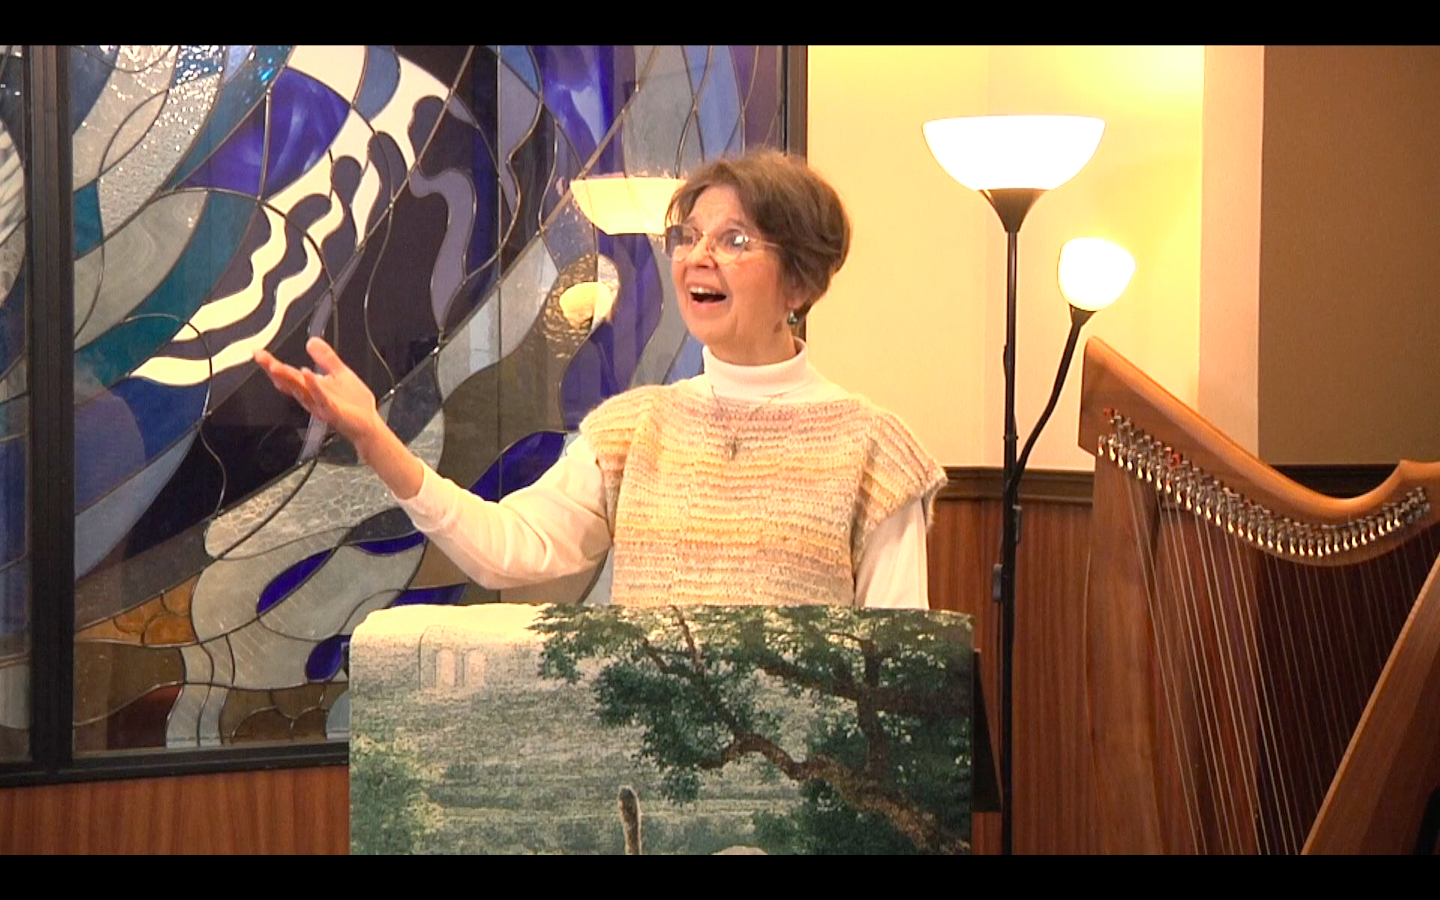 The Video Version of “Encountering Psalms” by Carol Sack is Now Available!